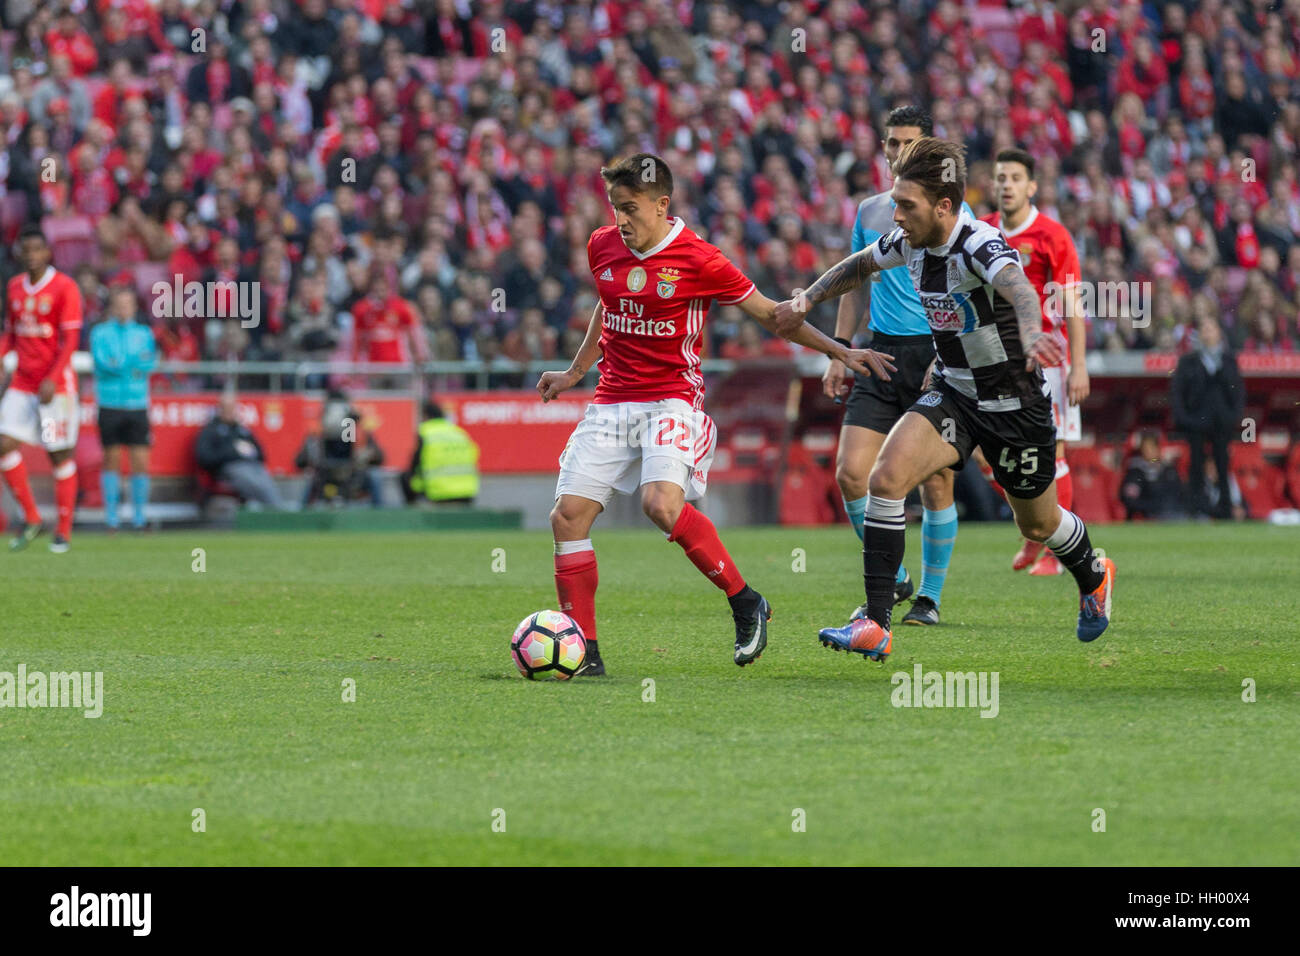 Lisbon, Portugal. 14th January, 2017.Benfica's forward from Argentina Franco Cervi (22) in action during the game SL Benfica v Boavista FC in Lisbon, Portugal. © Alexandre de Sousa/Alamy Live News Stock Photo